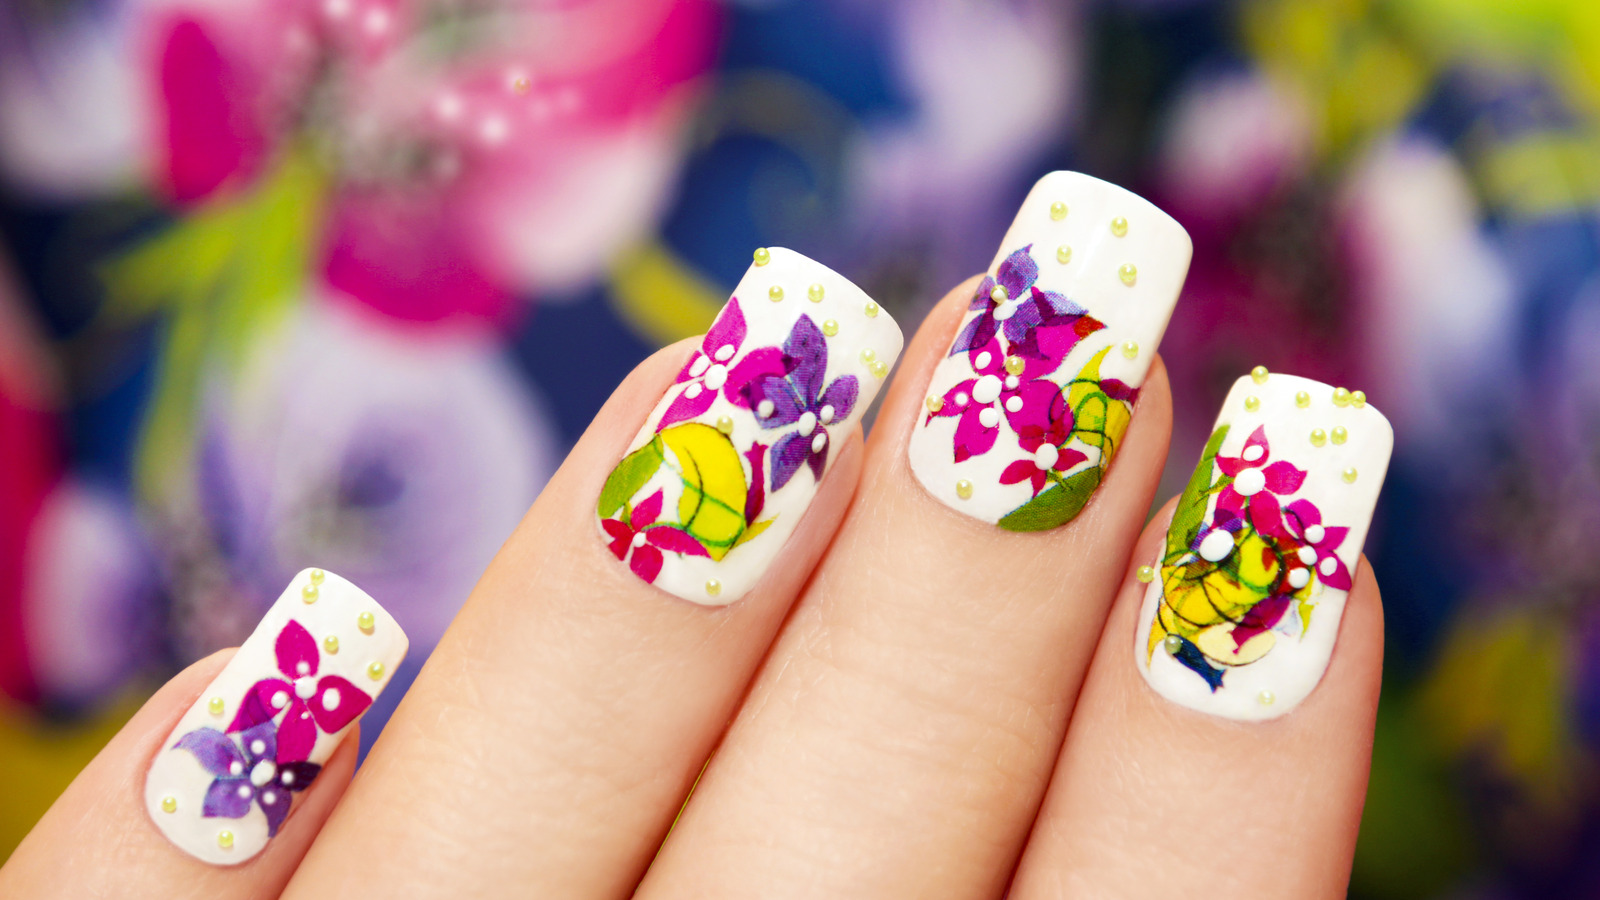 4. 20 Nail Art Hacks That Will Change Your Life from Buzzfeed - wide 2